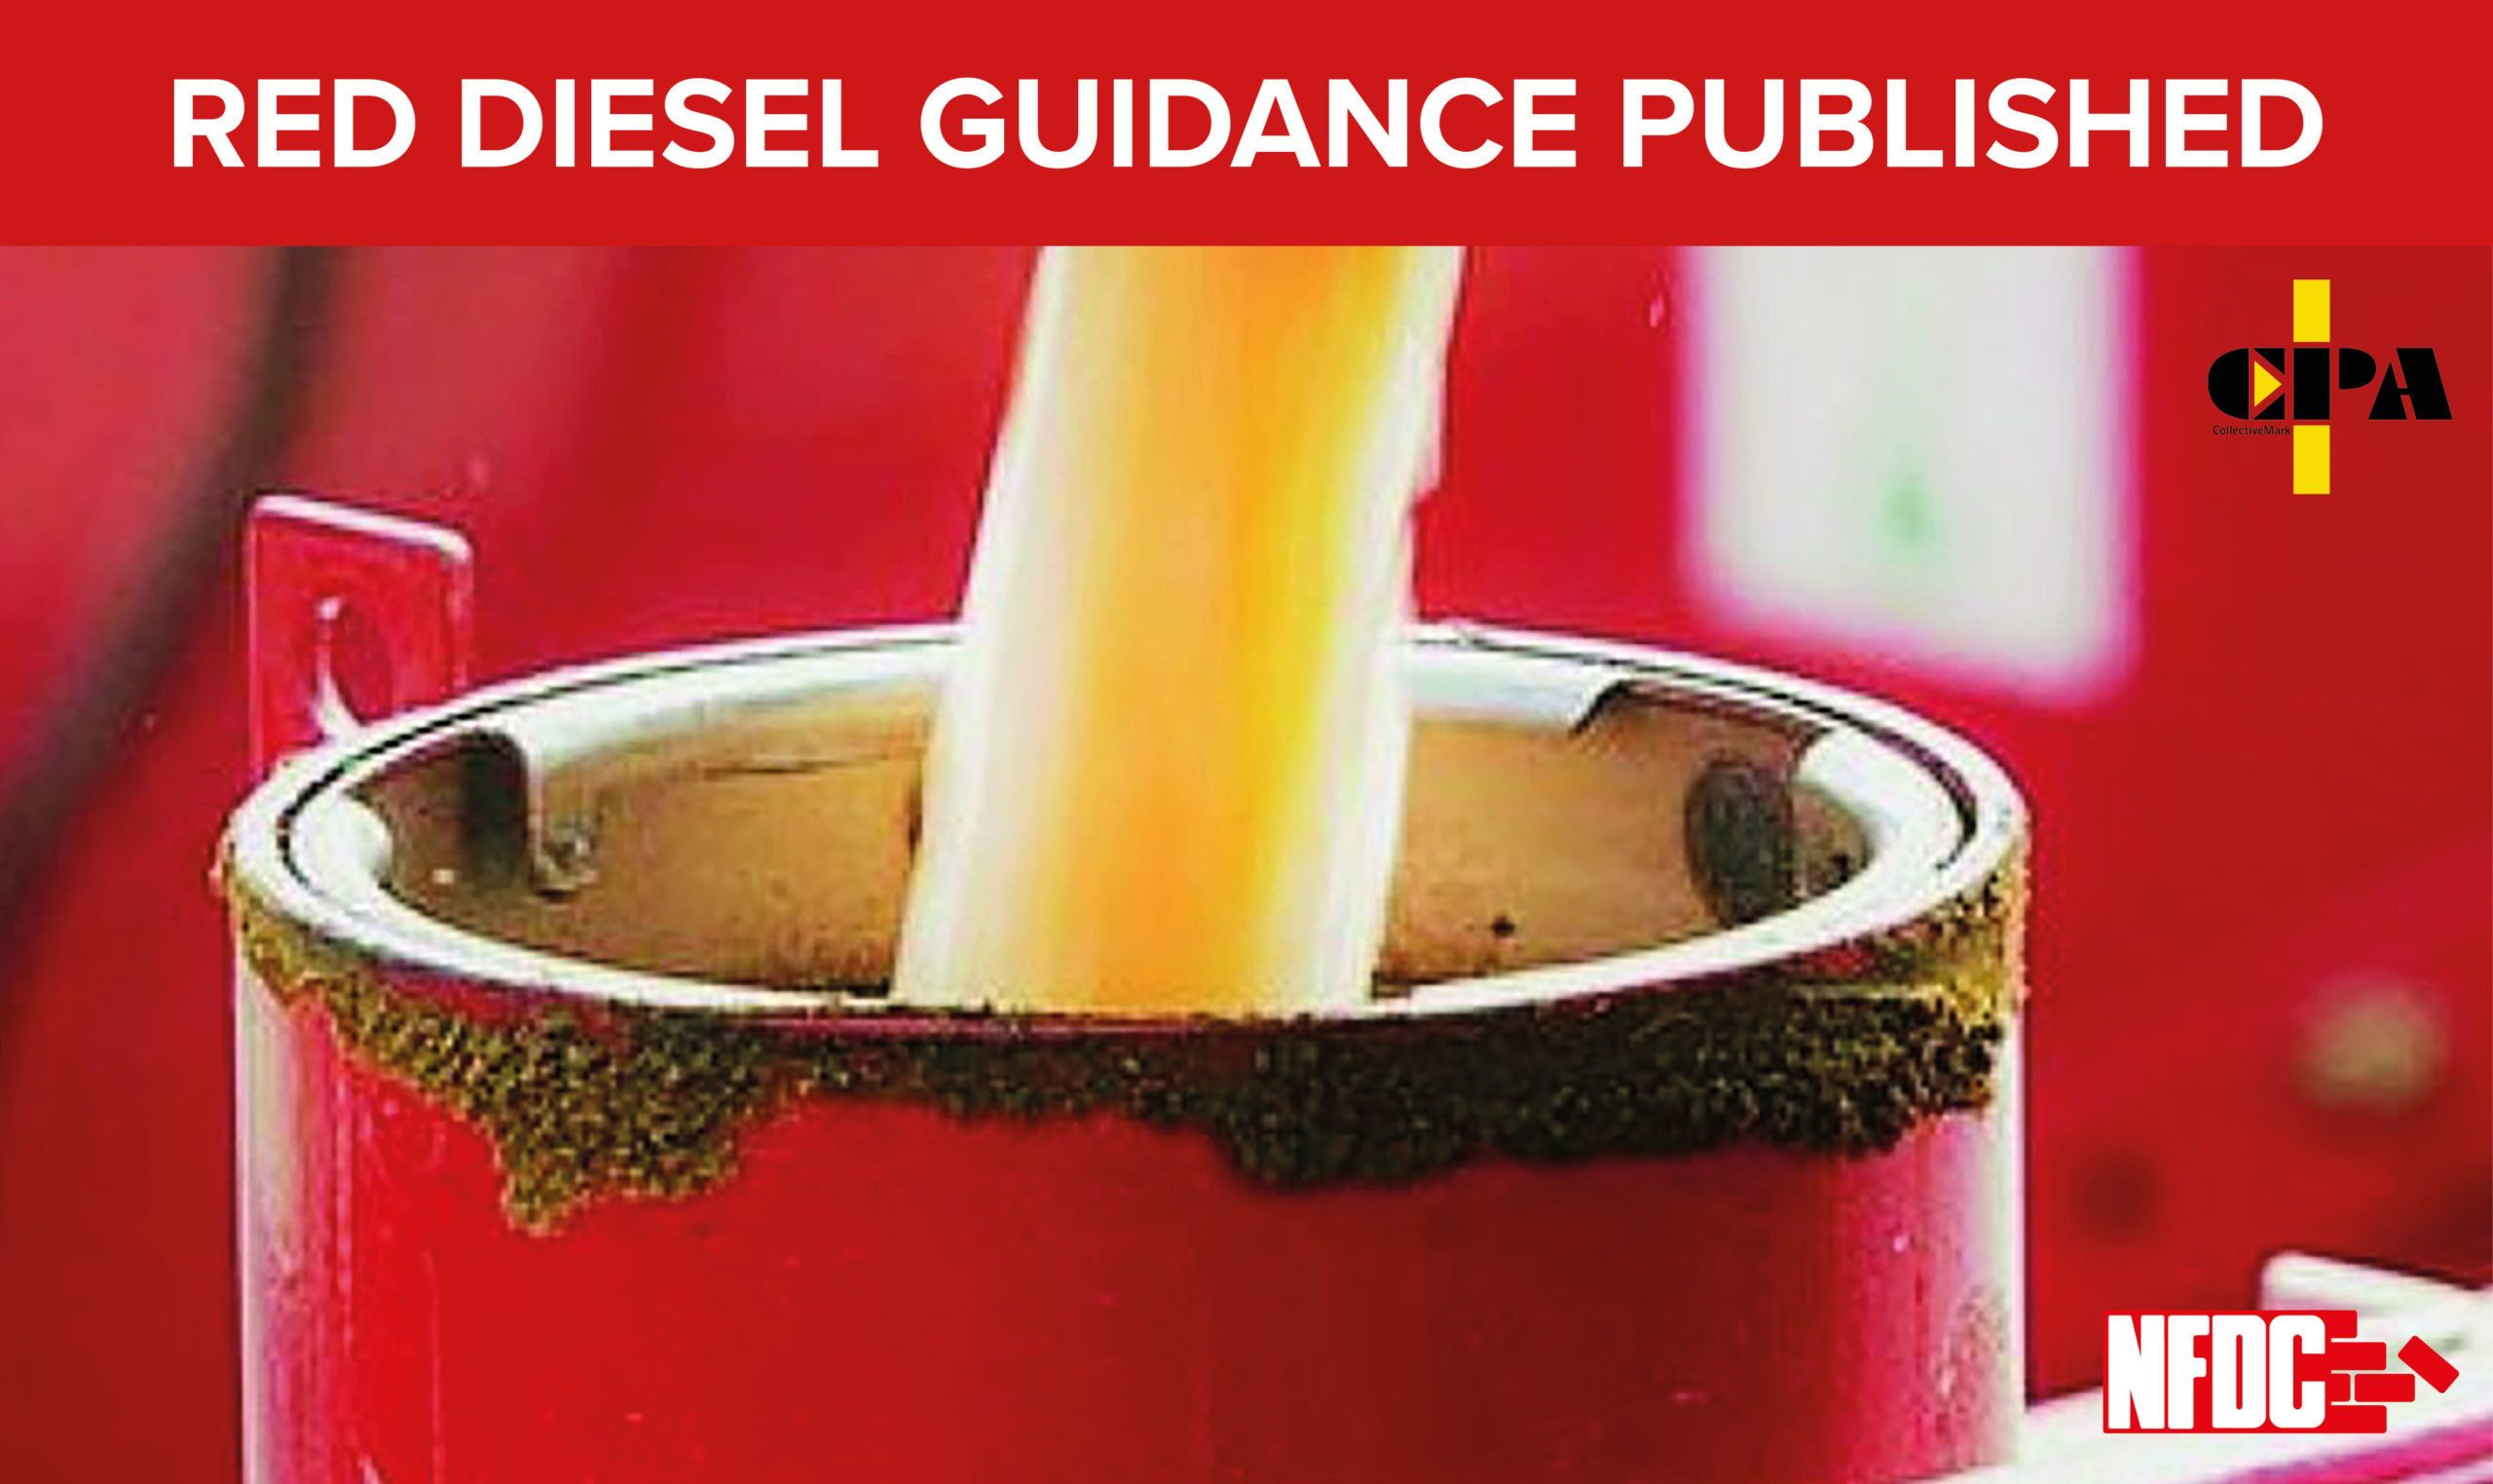 NFDC Publish Guidance on Red Diesel & Rebated Fuels